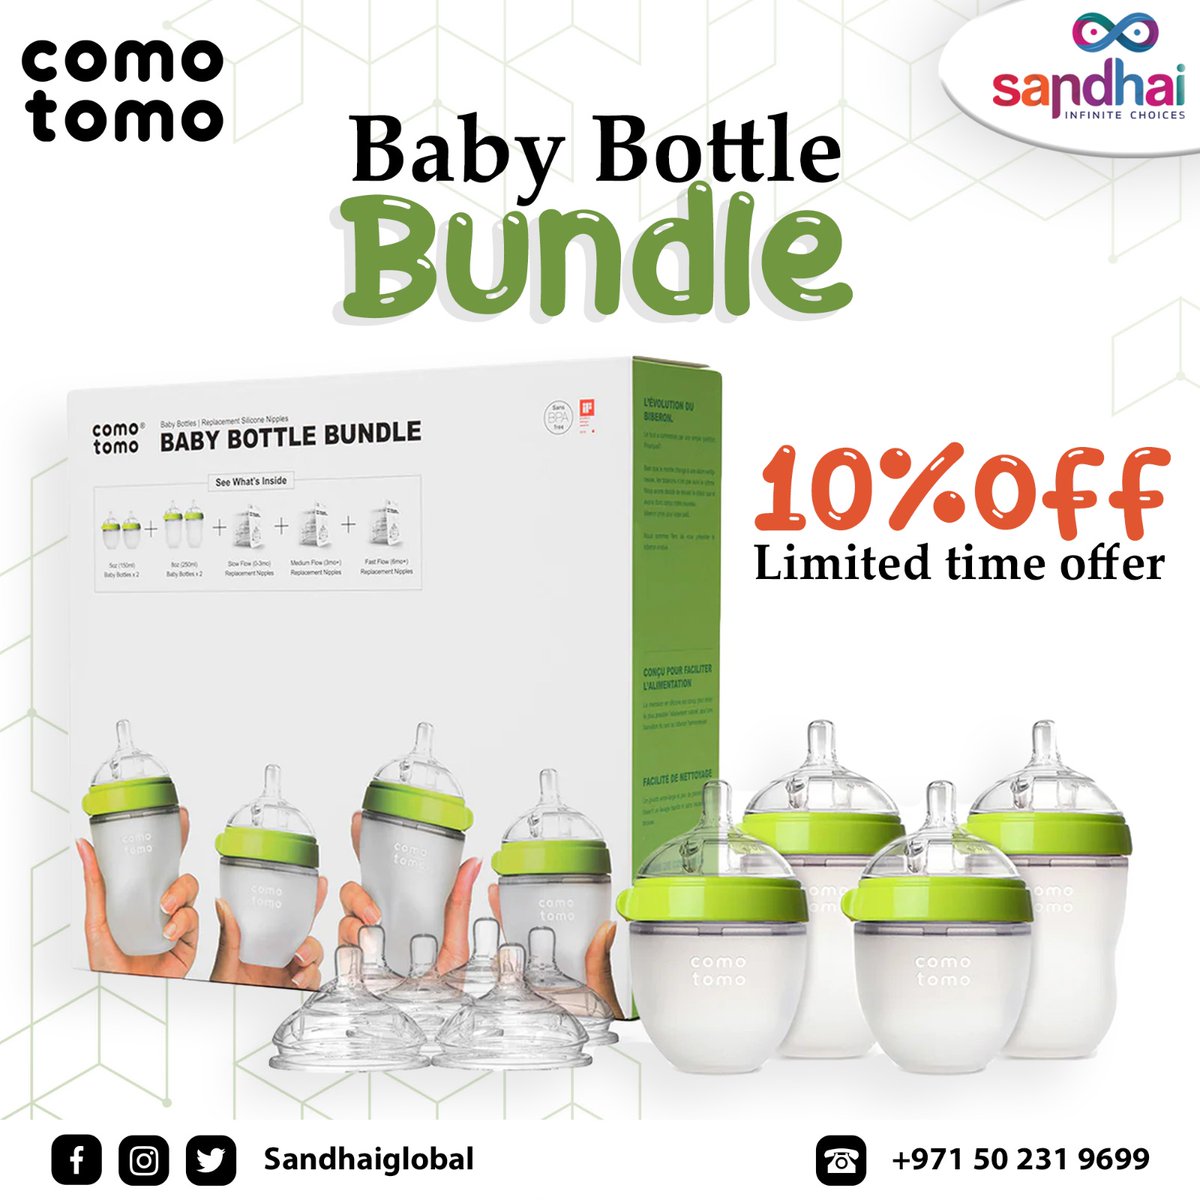 🌼 Calling all amazing moms and dads! 🌼

Available Only on Sandhai.ae
👉Buy now
slg.smartdx.co/L6PEDz
🛒-sandhai.ae

#Sandhai #MotherCare #ParentingJourney #BabyEssentials #DiscountOffer #OnlineShopping #ShopWithEase